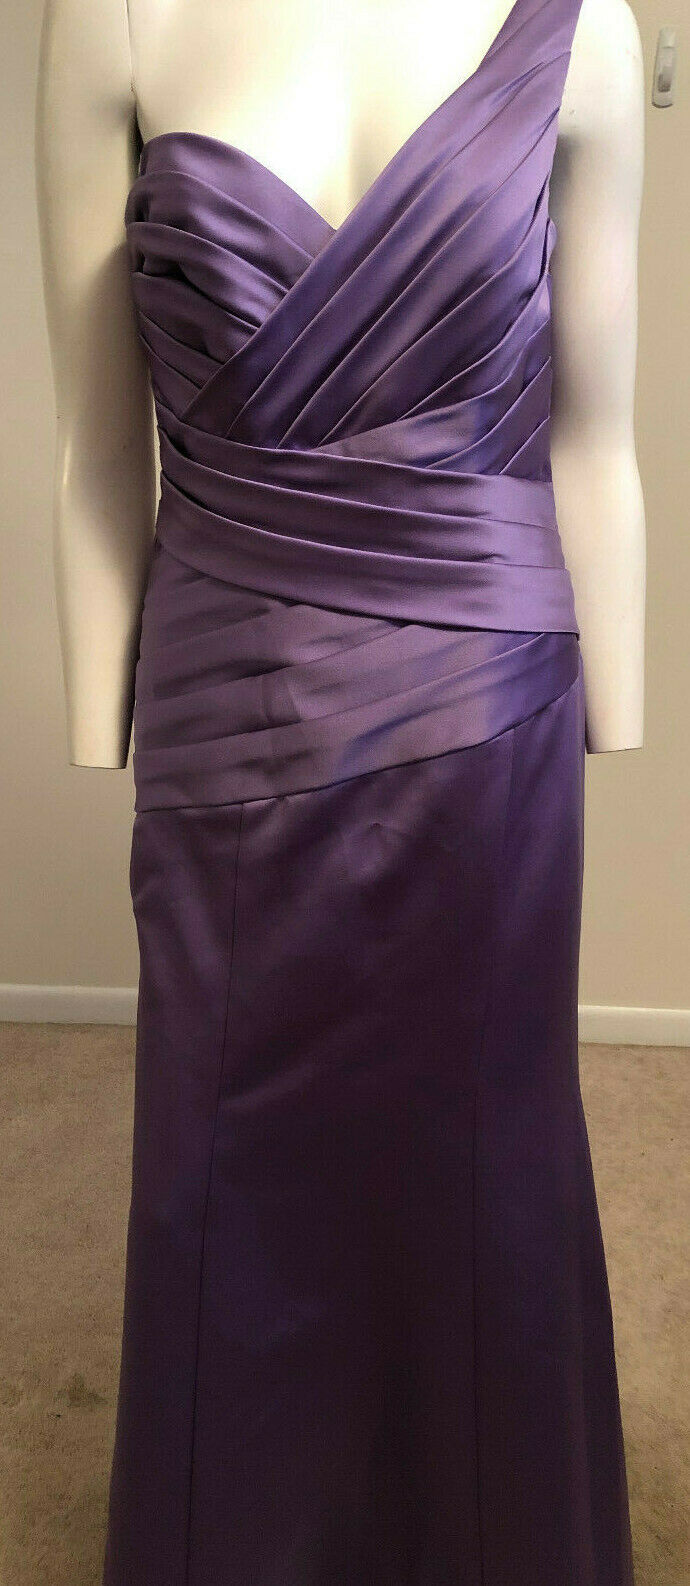 NWT One Shoulder Lavender Formal Prom Floor Length Dress by Alfred Angelo Size 8